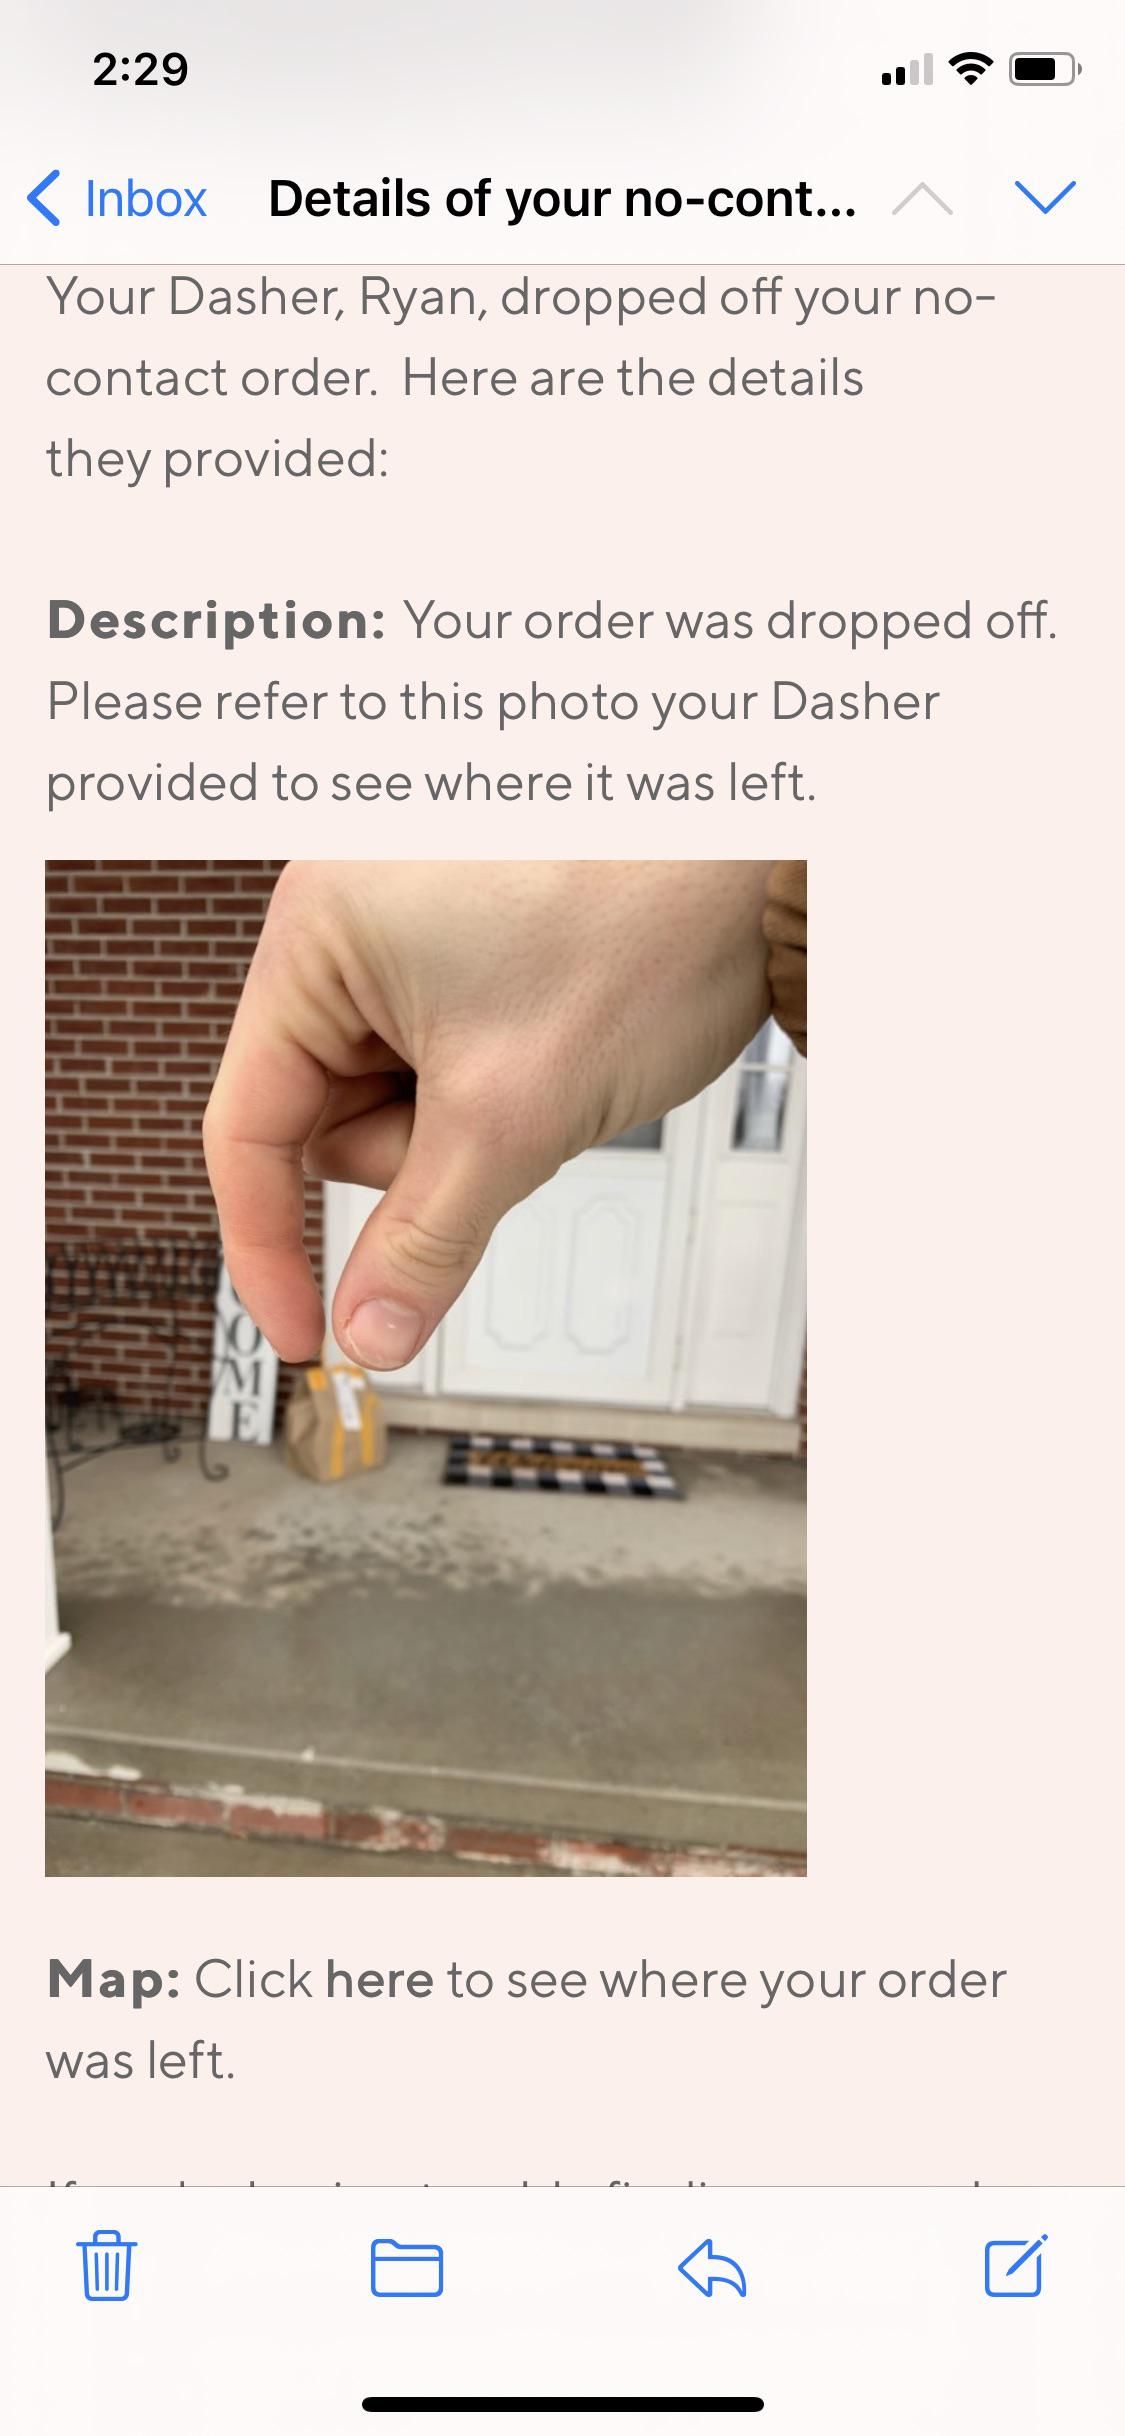 The best DoorDash delivery photo I have ever received.